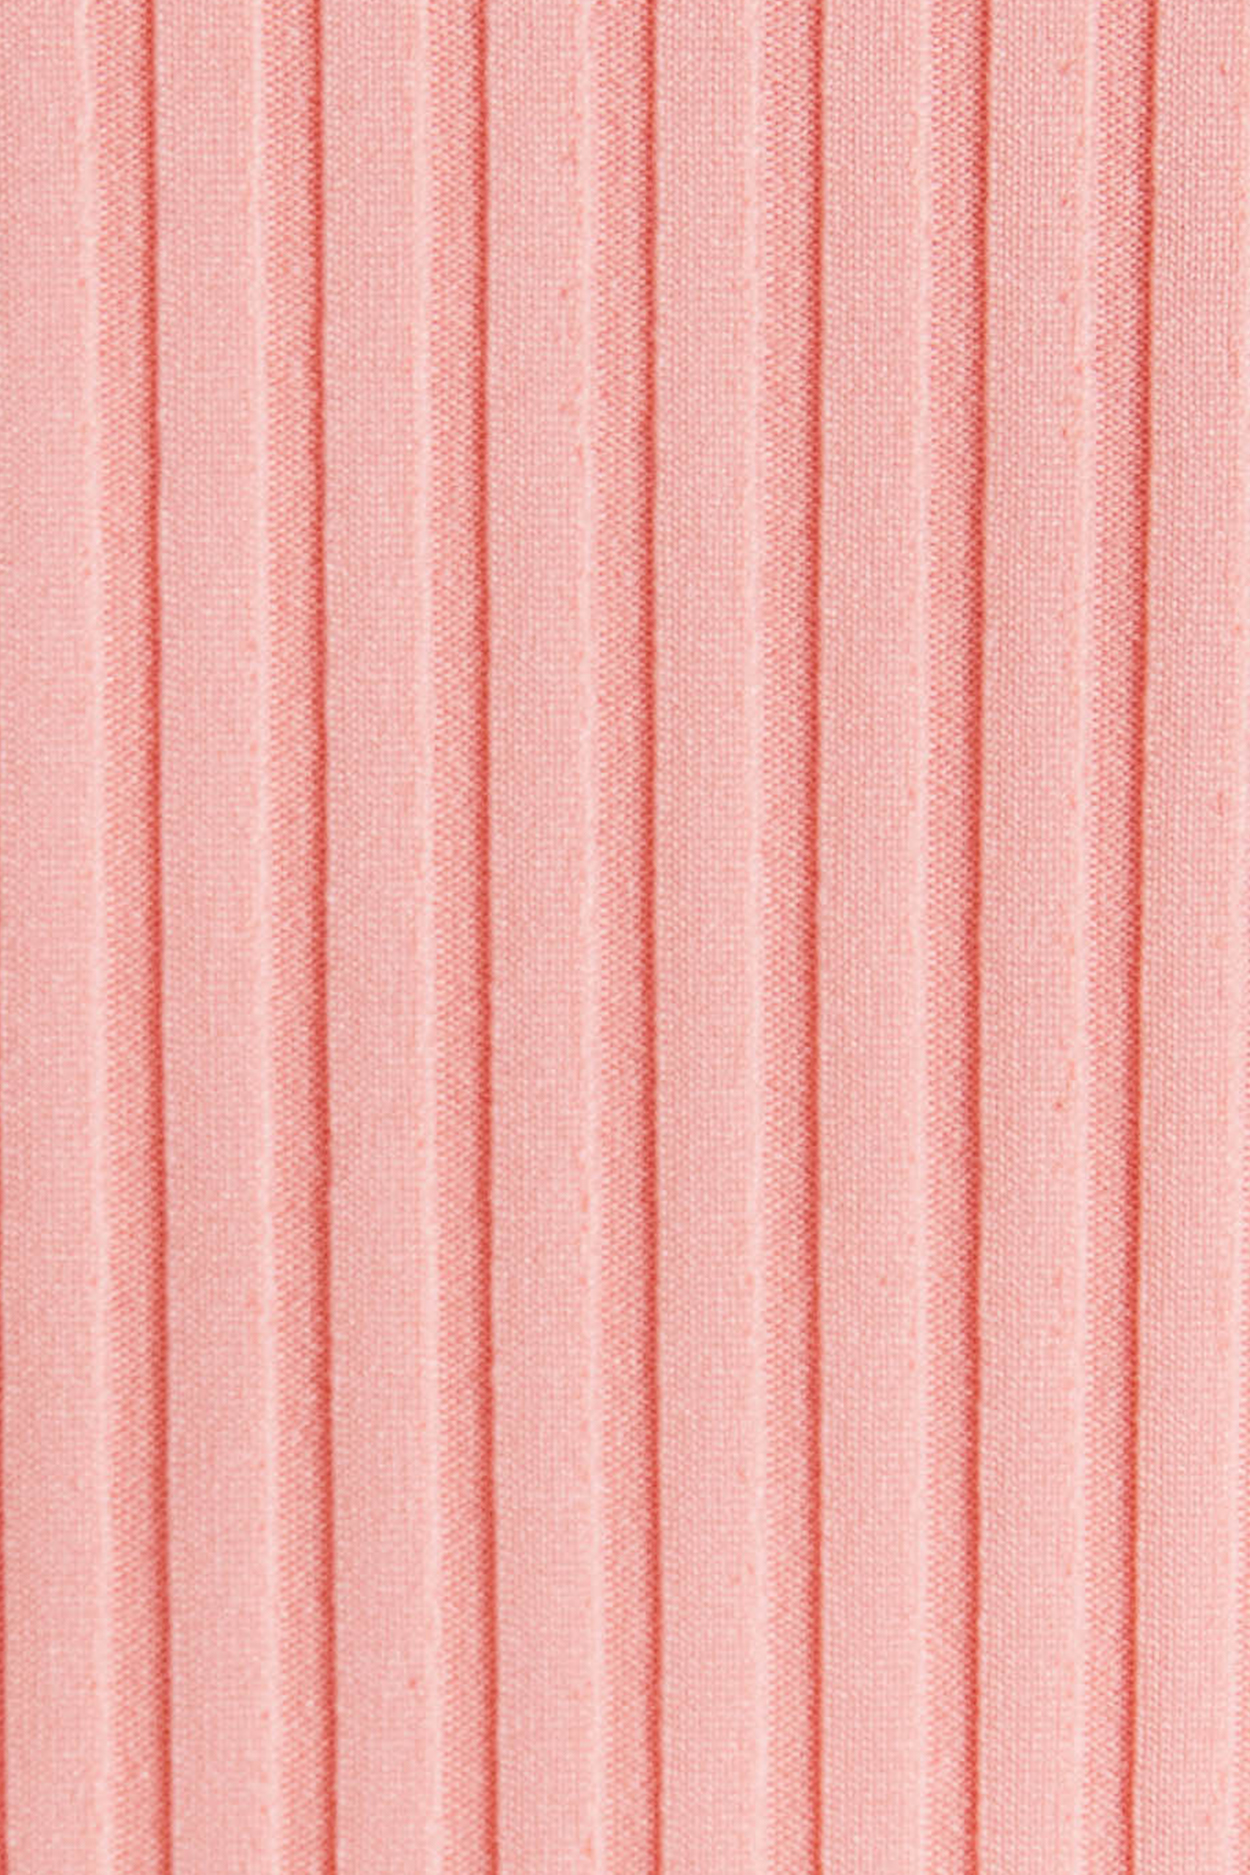 Pink Sands Fabric Swatch